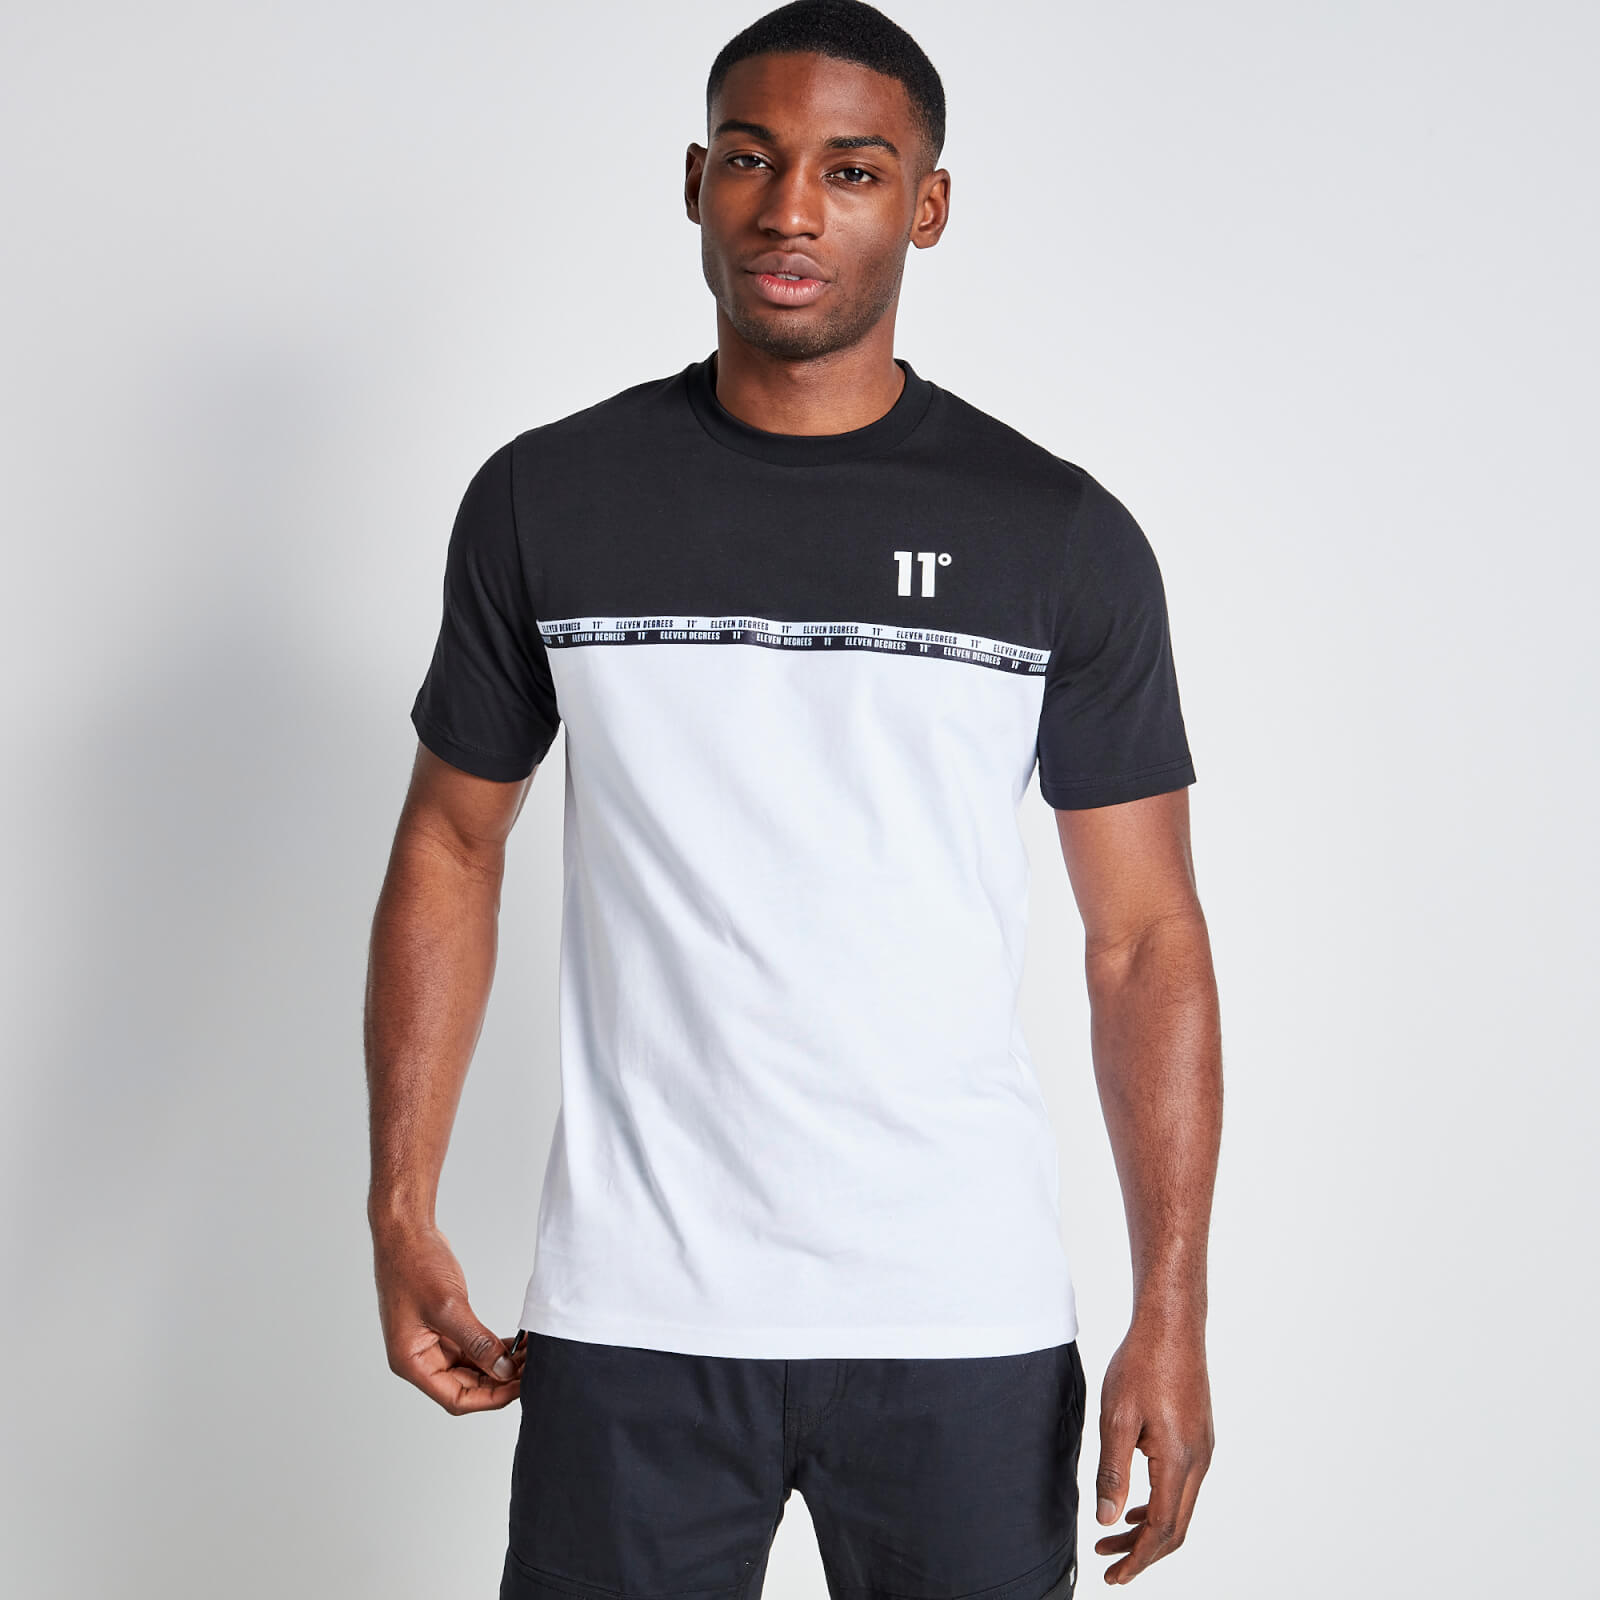 Double Taped T-Shirt - Black / White - XS from 11 Degrees